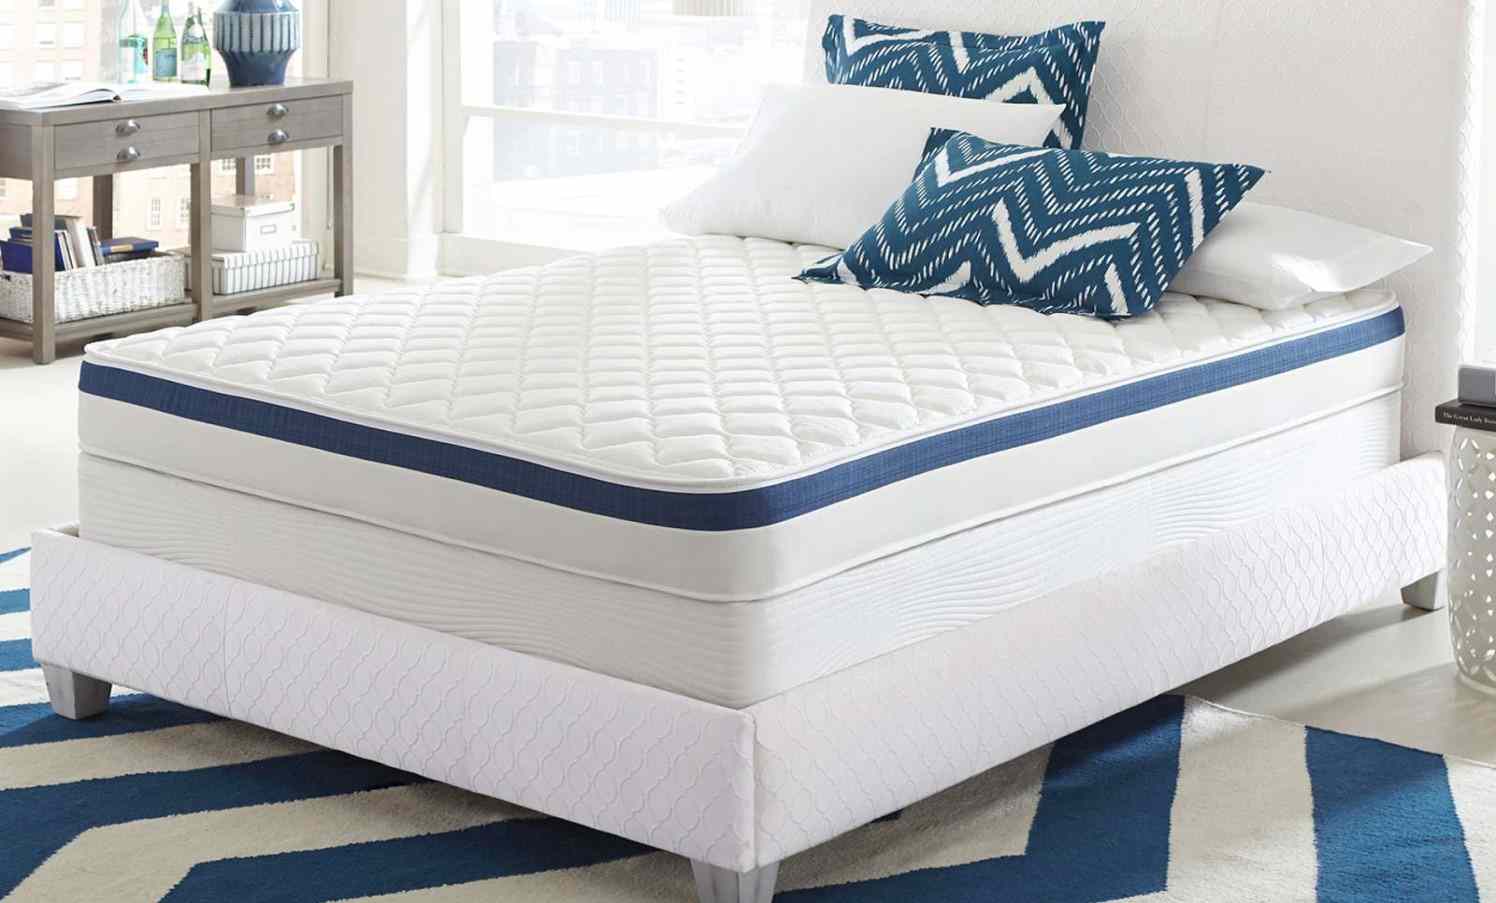 Used Double Mattress